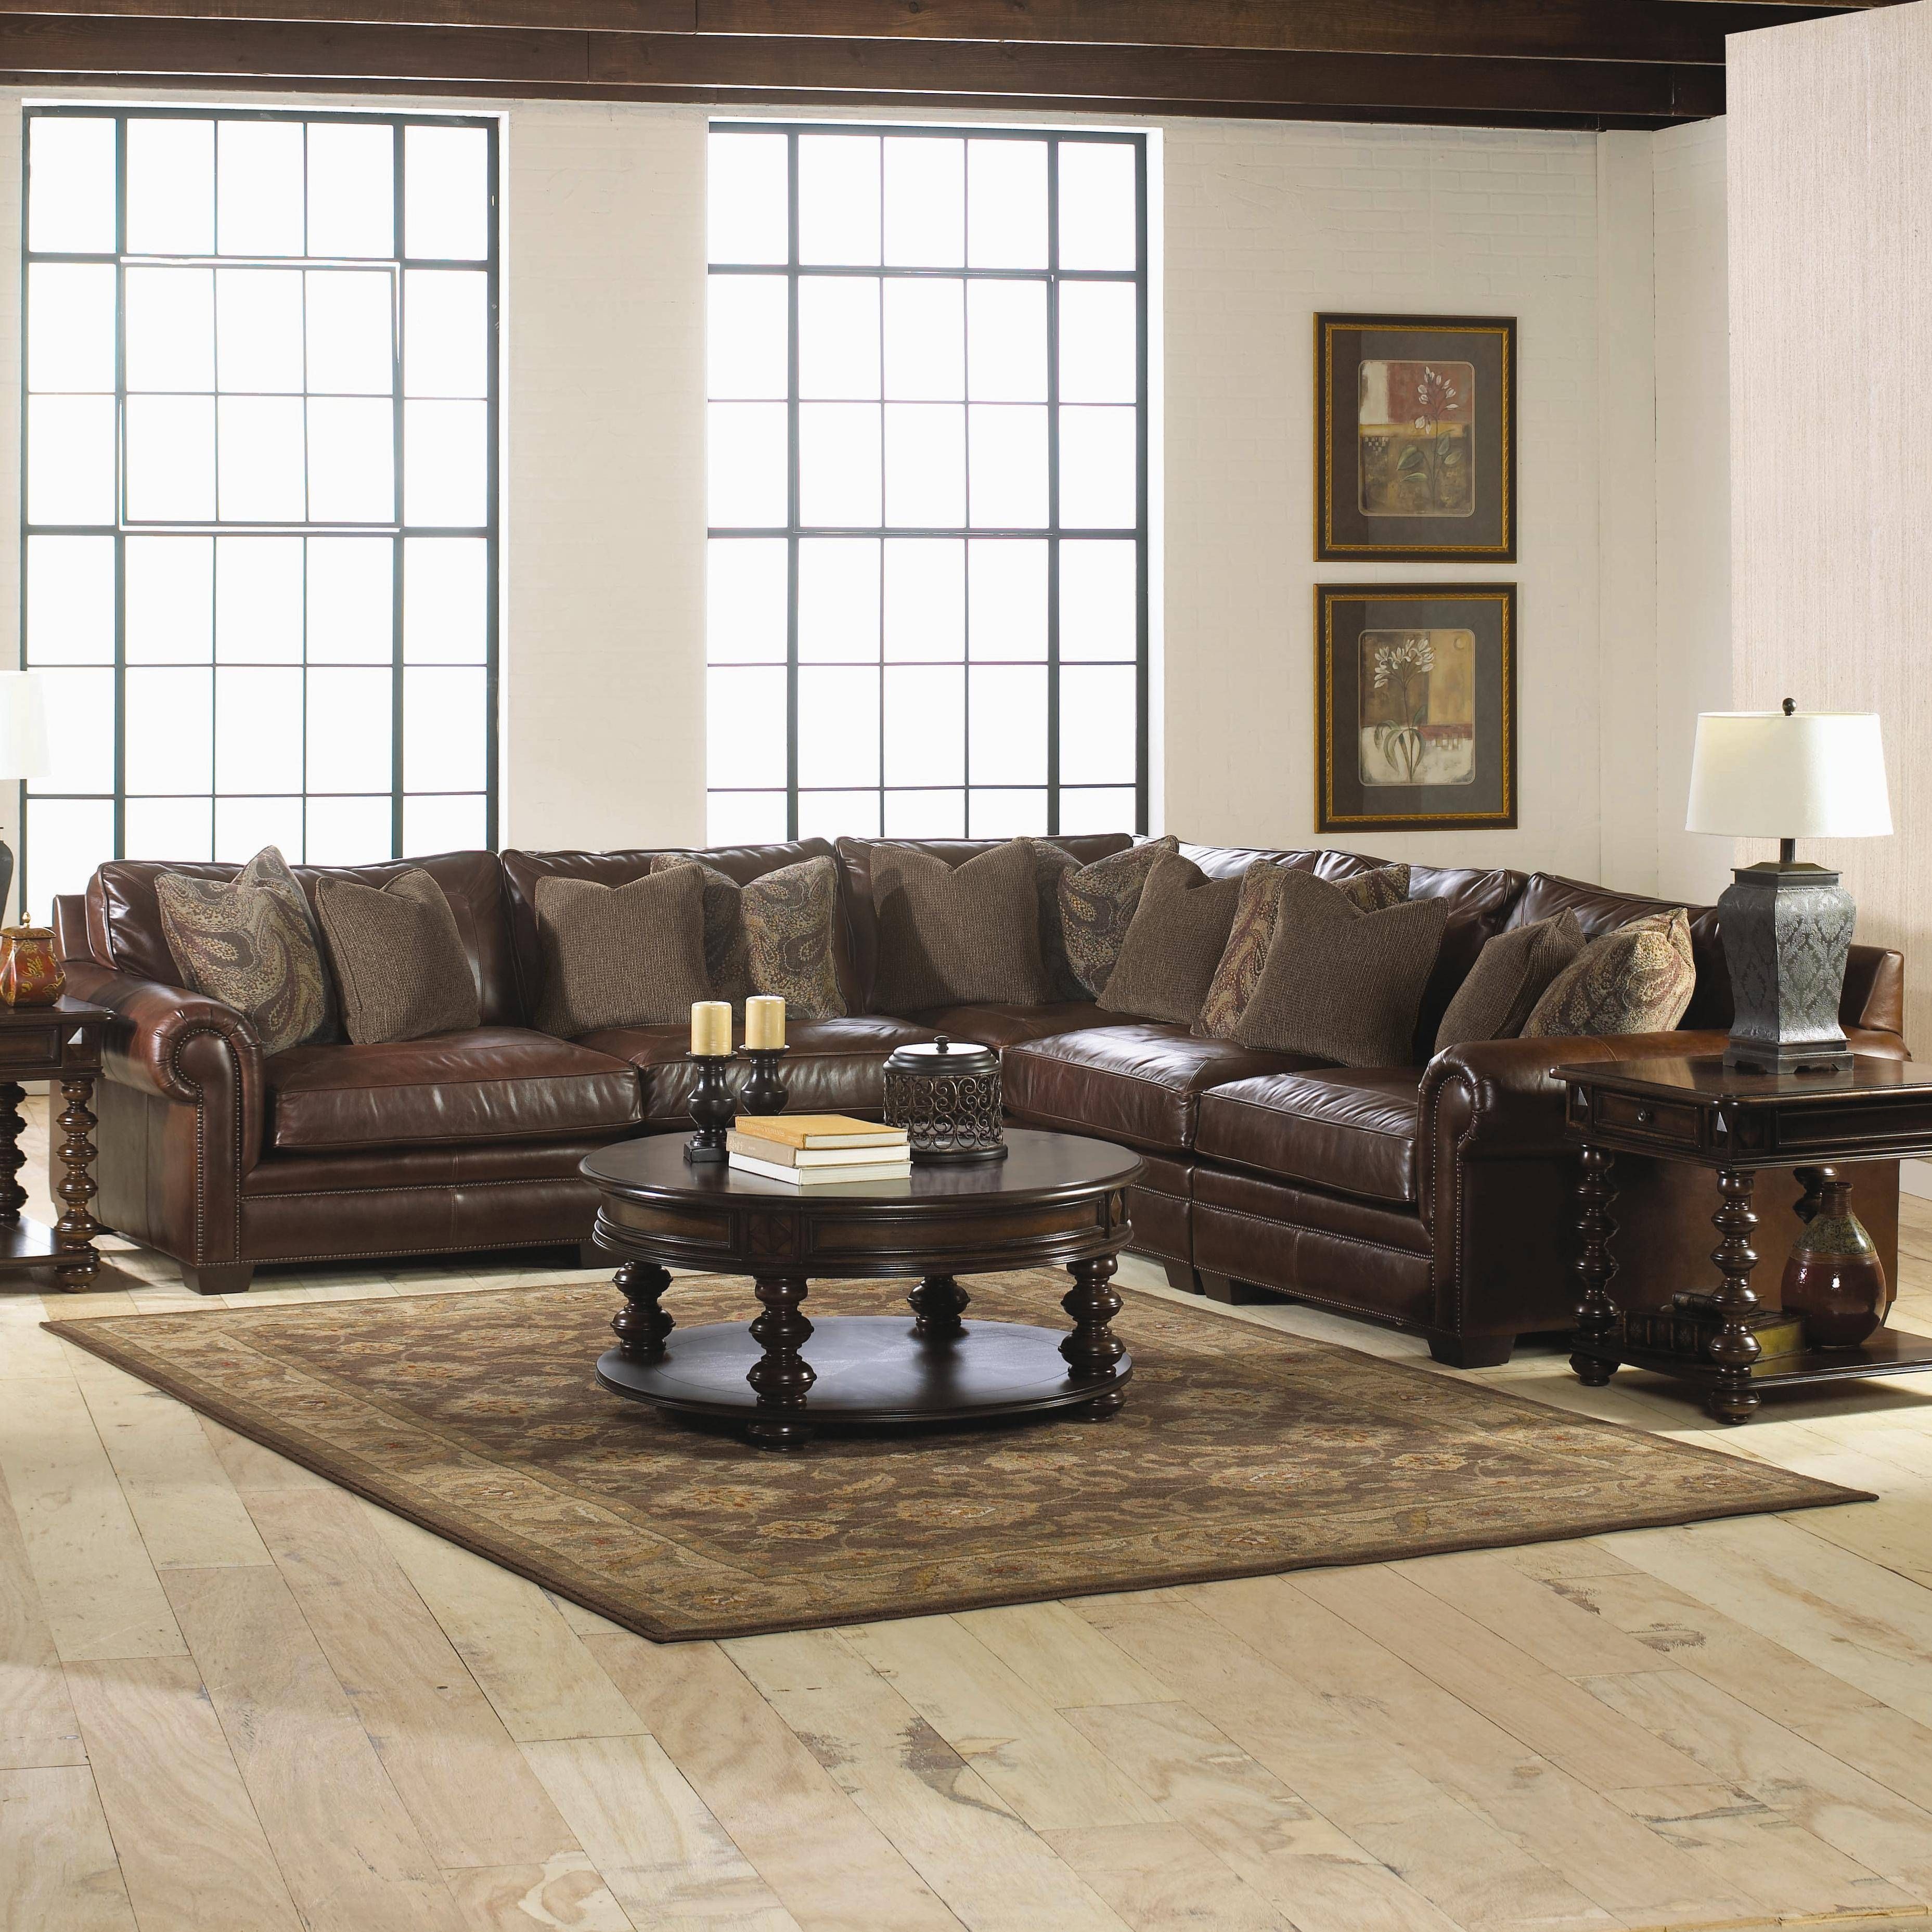 Sectional Sofas Havertys – Cleanupflorida For Leather Modular Sectional Sofas (View 26 of 30)